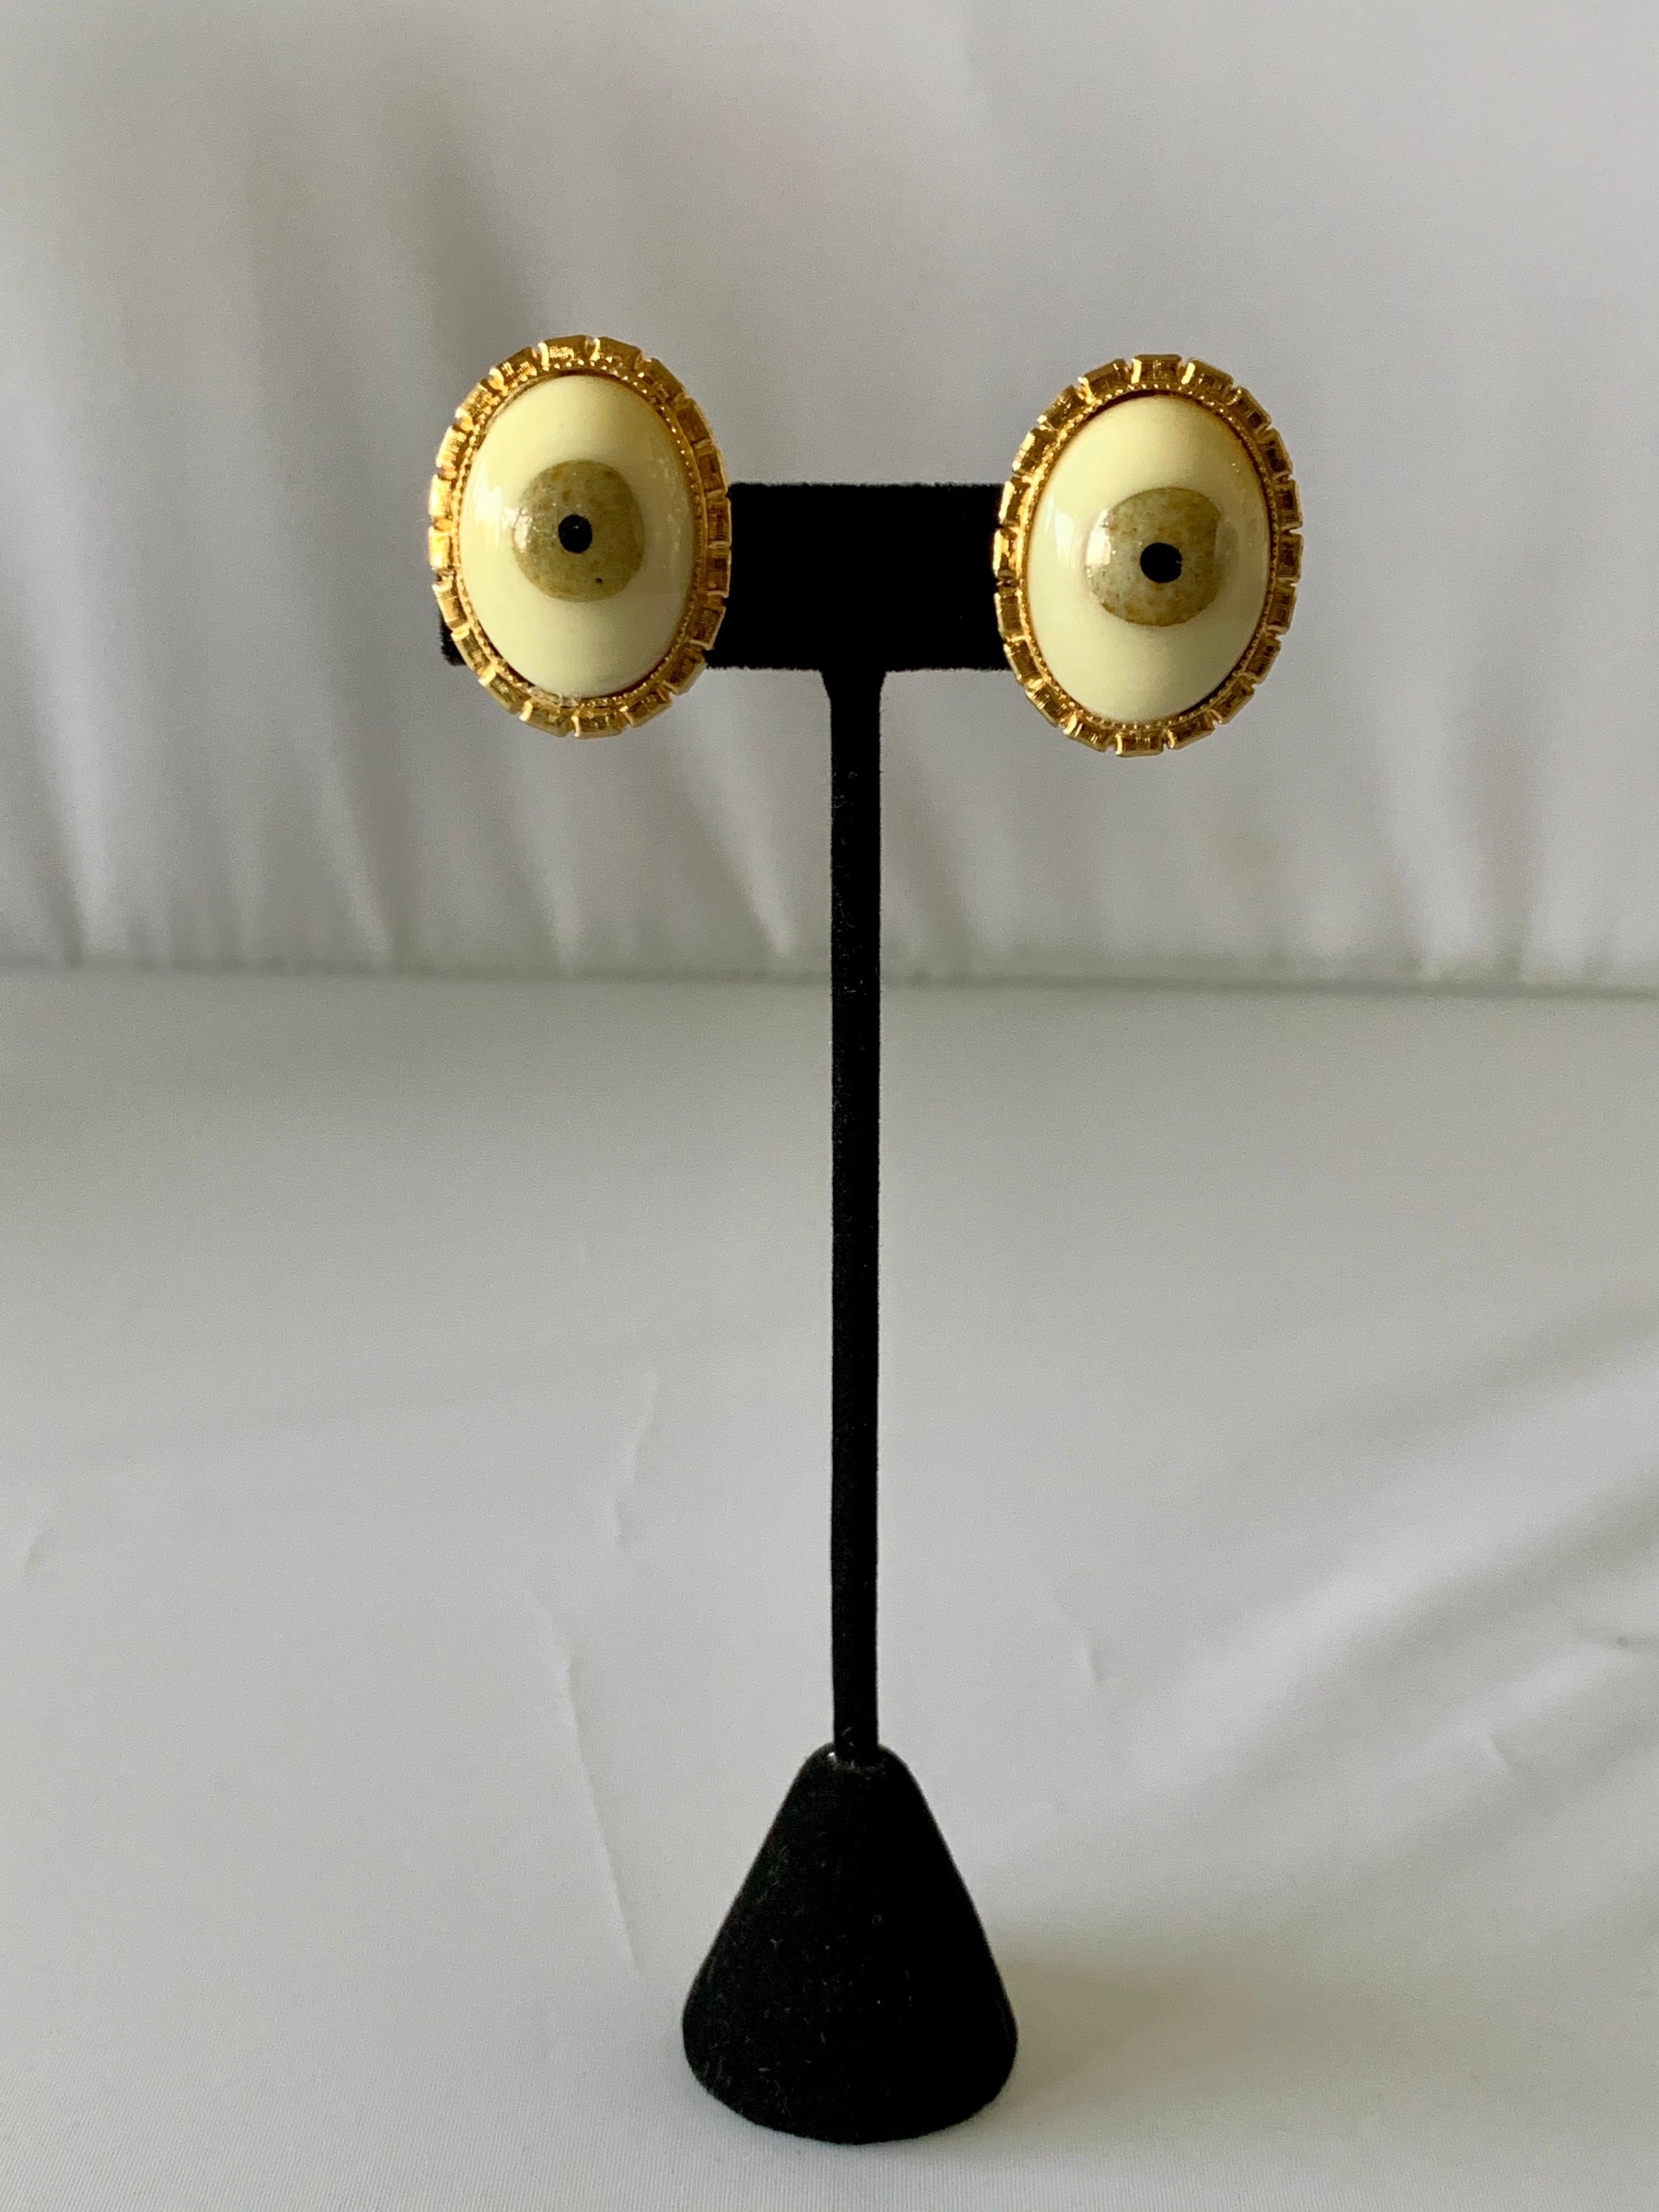 Vintage surrealist statement clip-on earrings comprised out of gilt metal featuring glass taxidermy eyes, by William de Lillo circa 1970. 